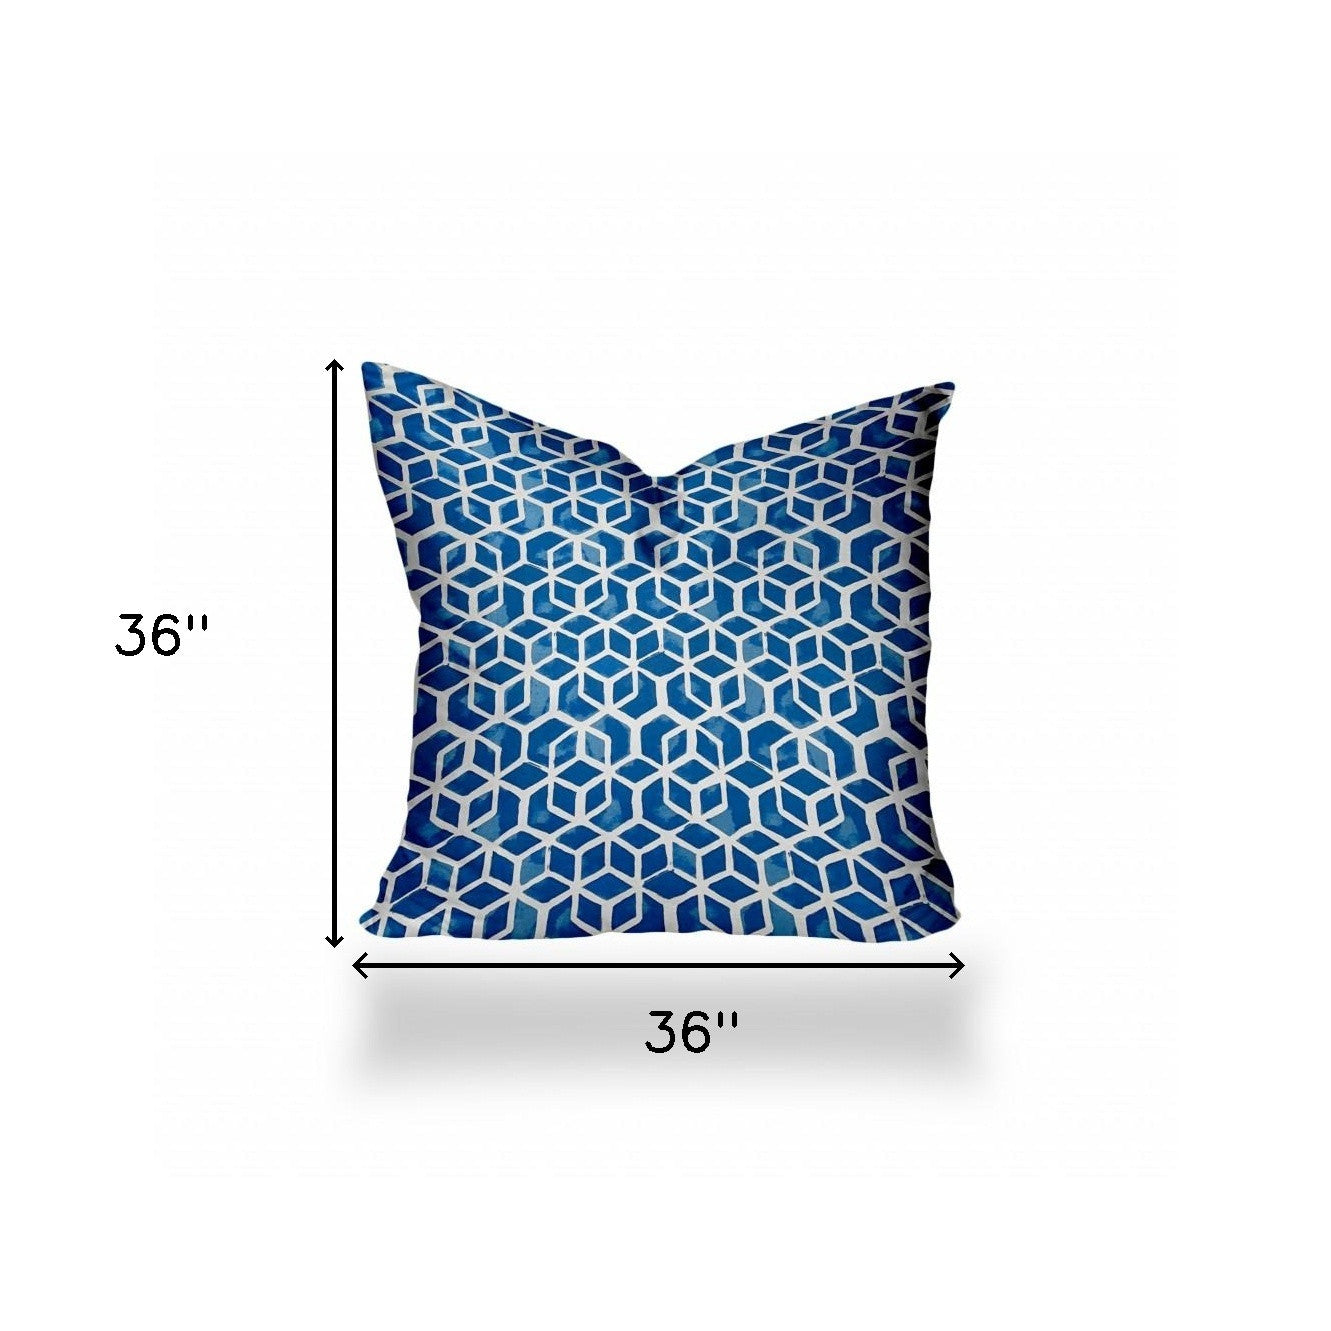 36" X 36" Blue And White Blown Seam Geometric Throw Indoor Outdoor Pillow